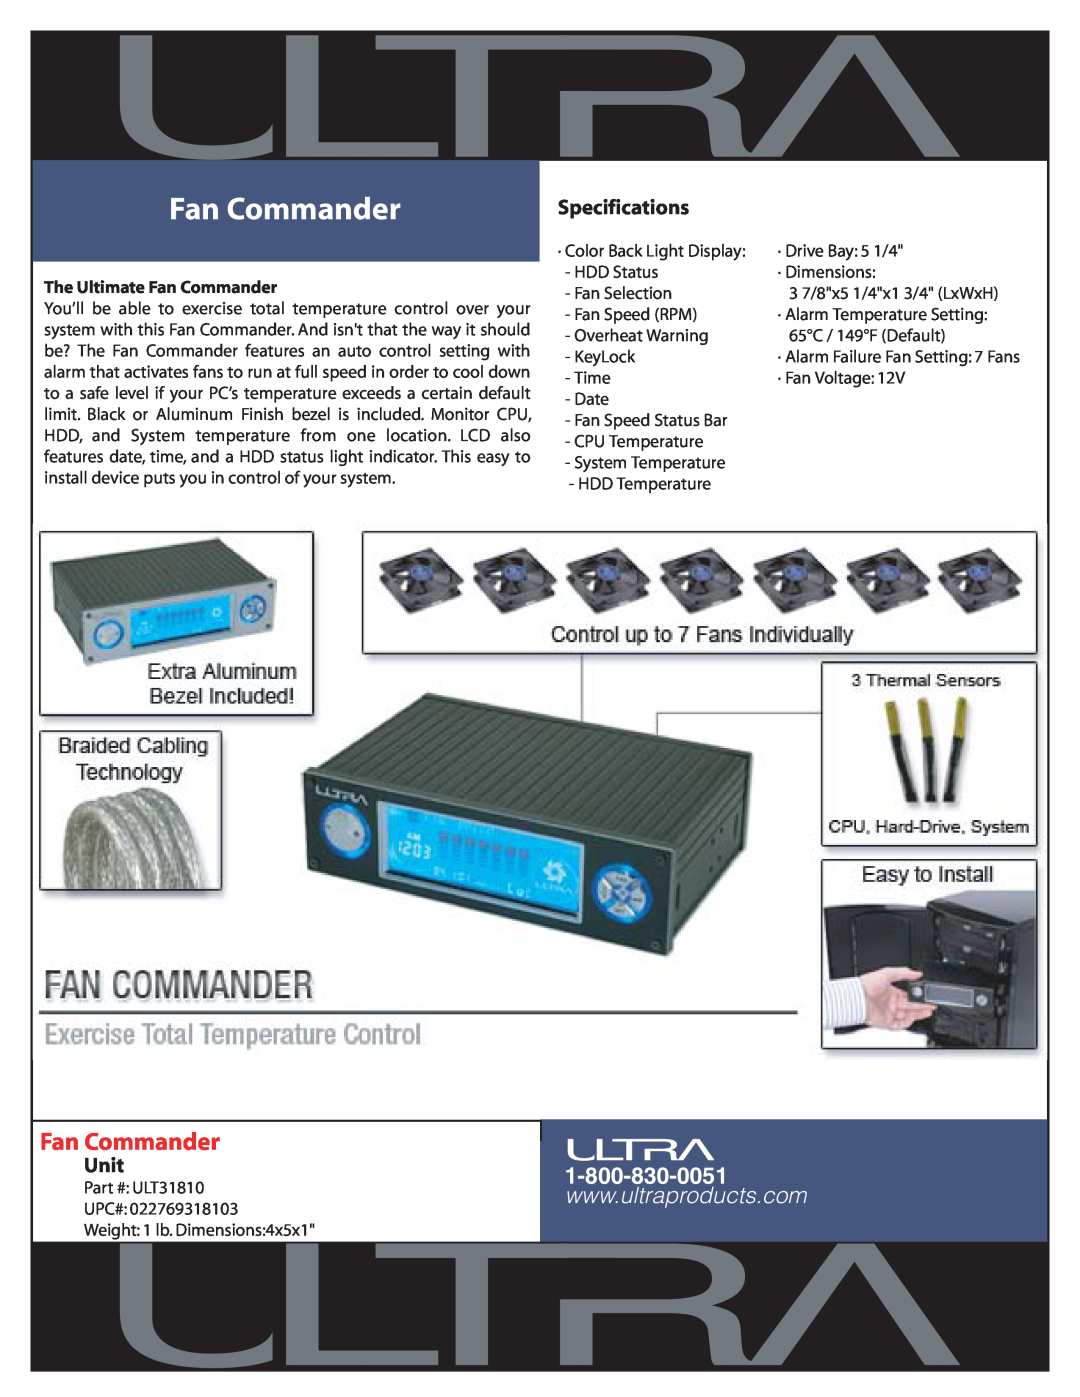 Ultra Products ULT31810 specifications Unit, Specifications, The Ultimate Fan Commander 